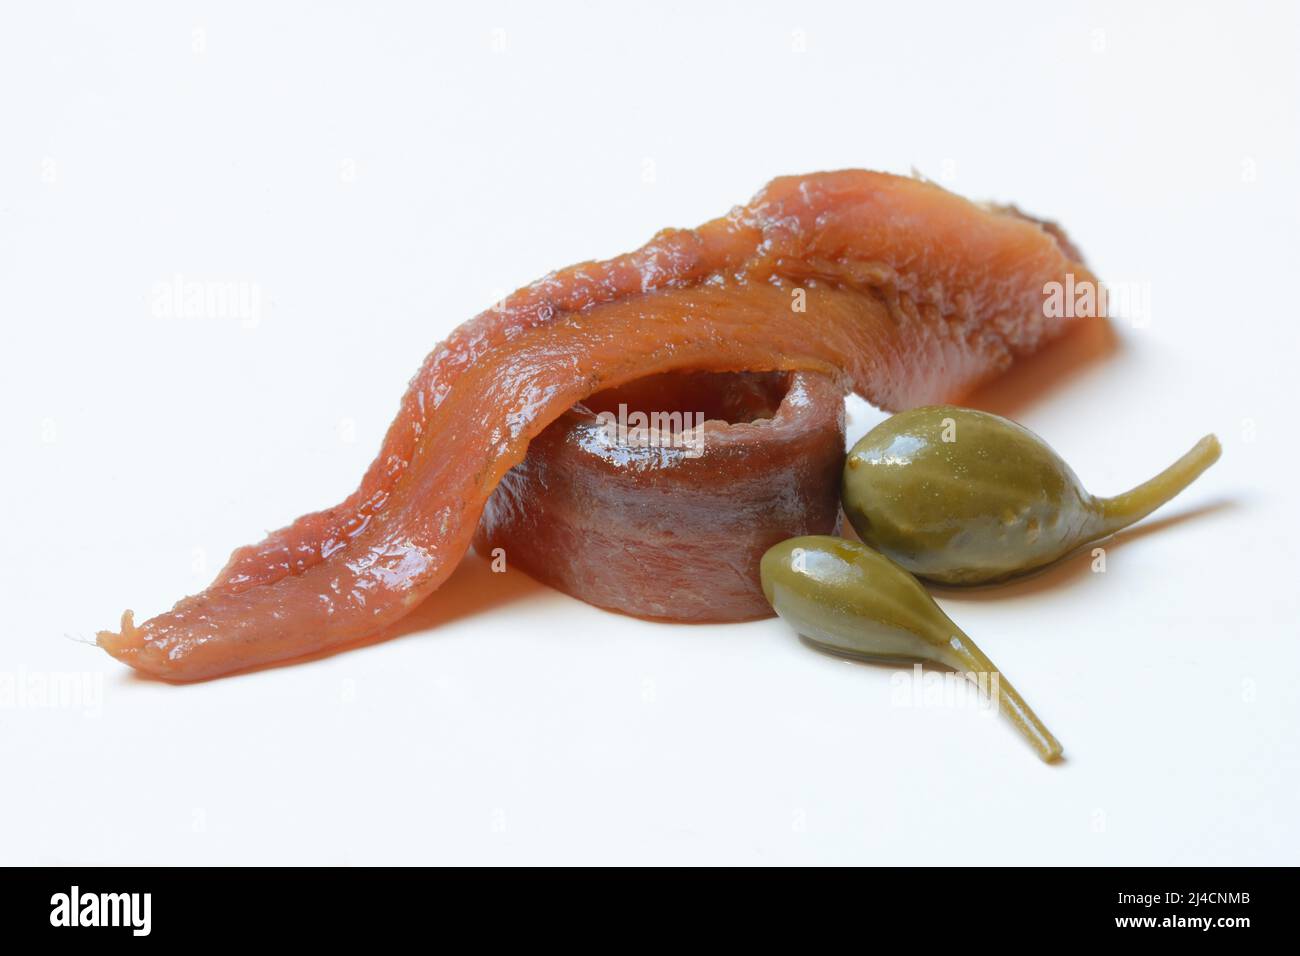 European anchovy (Engraulis encrasicolus), anchovy fillets and caper apples Stock Photo